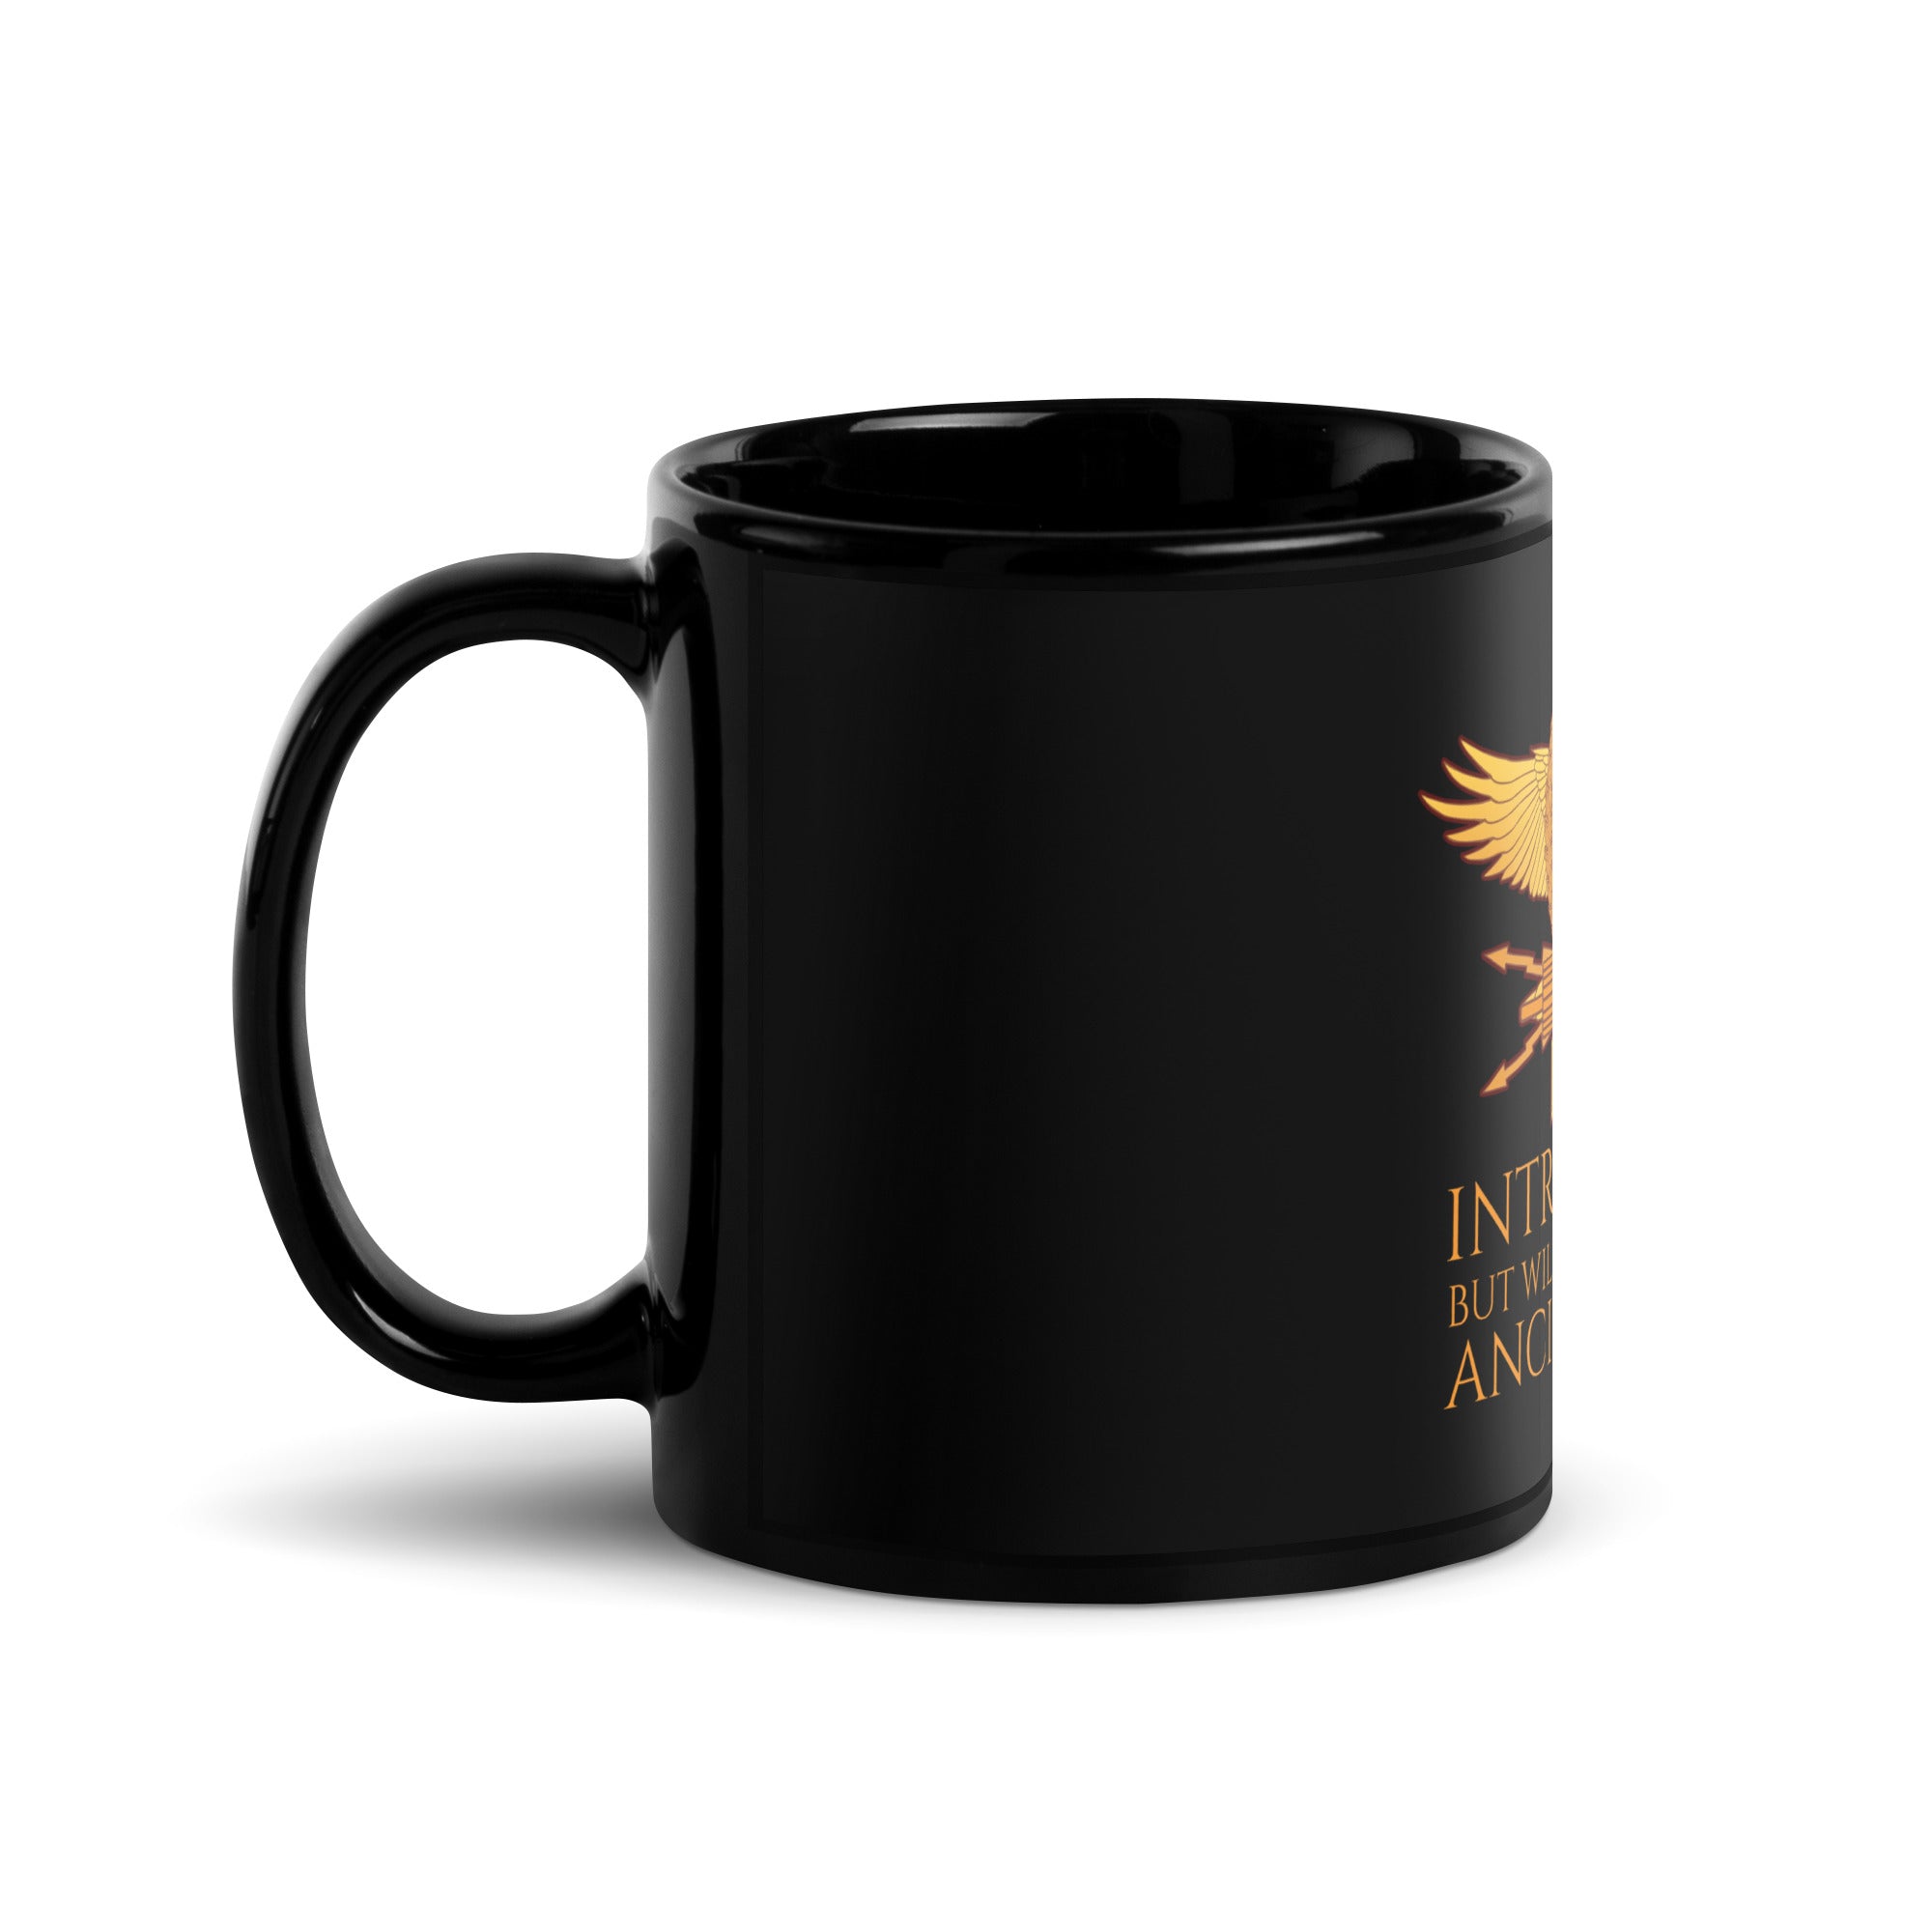 Introverted, But Willing To Discuss Ancient Rome - Roman History Black Glossy Mug